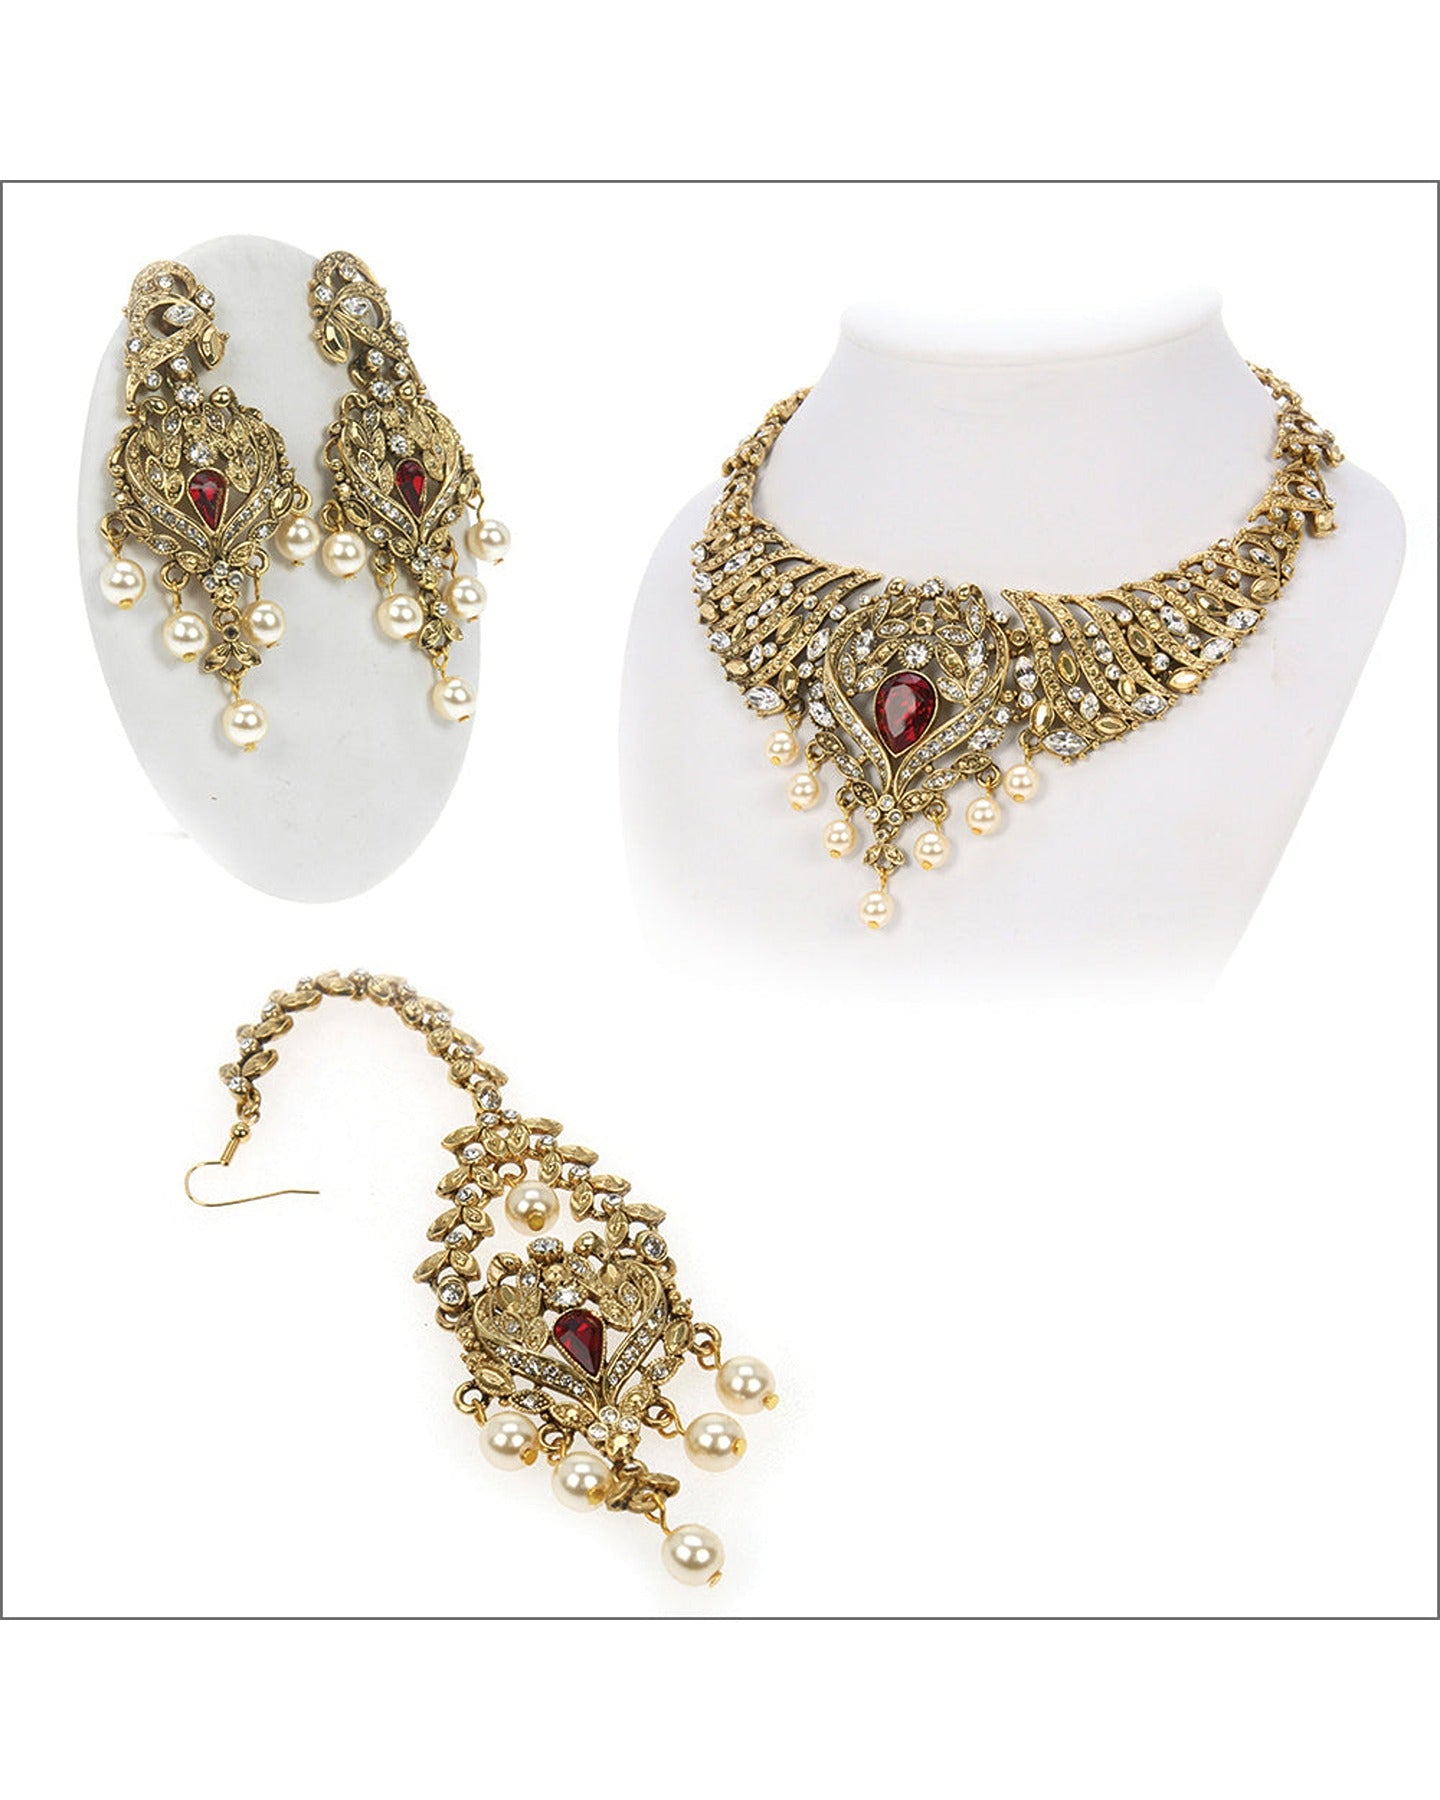 Antique Gold Jewelry with Siam Red and Crystal Stones